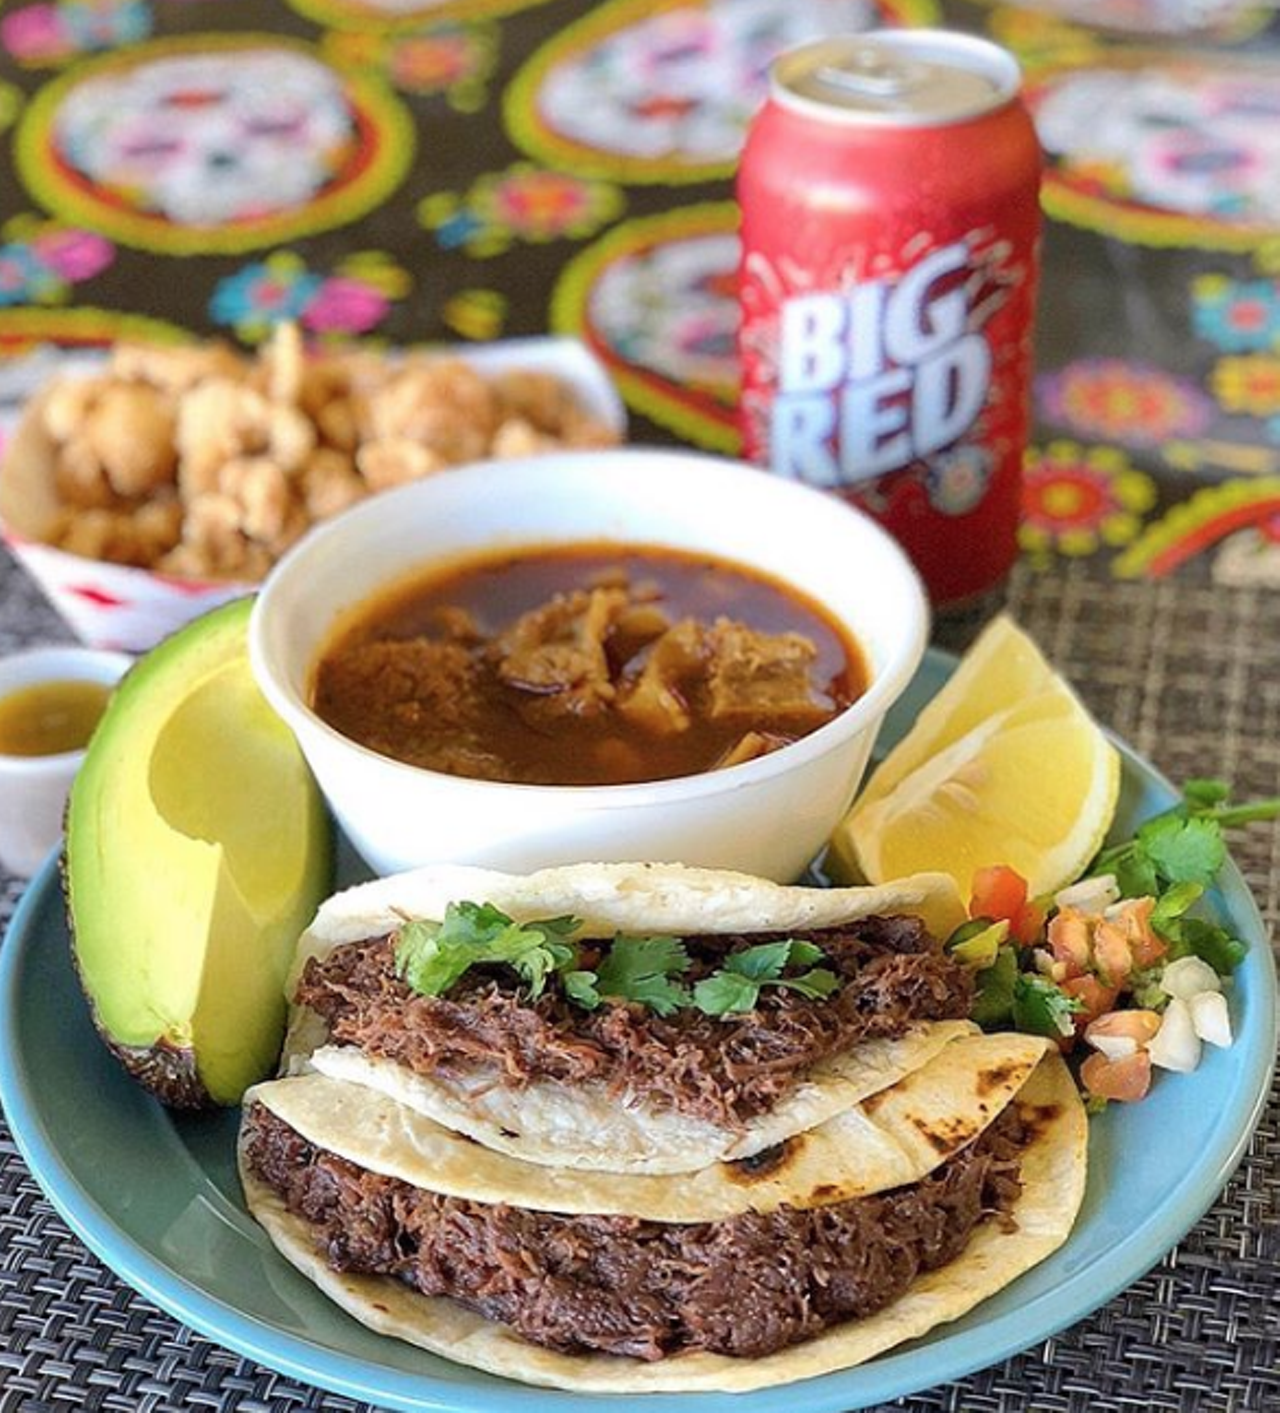 Rios Barbacoa
Multiple locations
Getting barbacoa from Rios? You might as well get a 10-pack tortillas while you’re at it. Choose between corn or flour, and don’t forget to pick up some salsa too.
Photo via Instagram / sanantoniostephanie